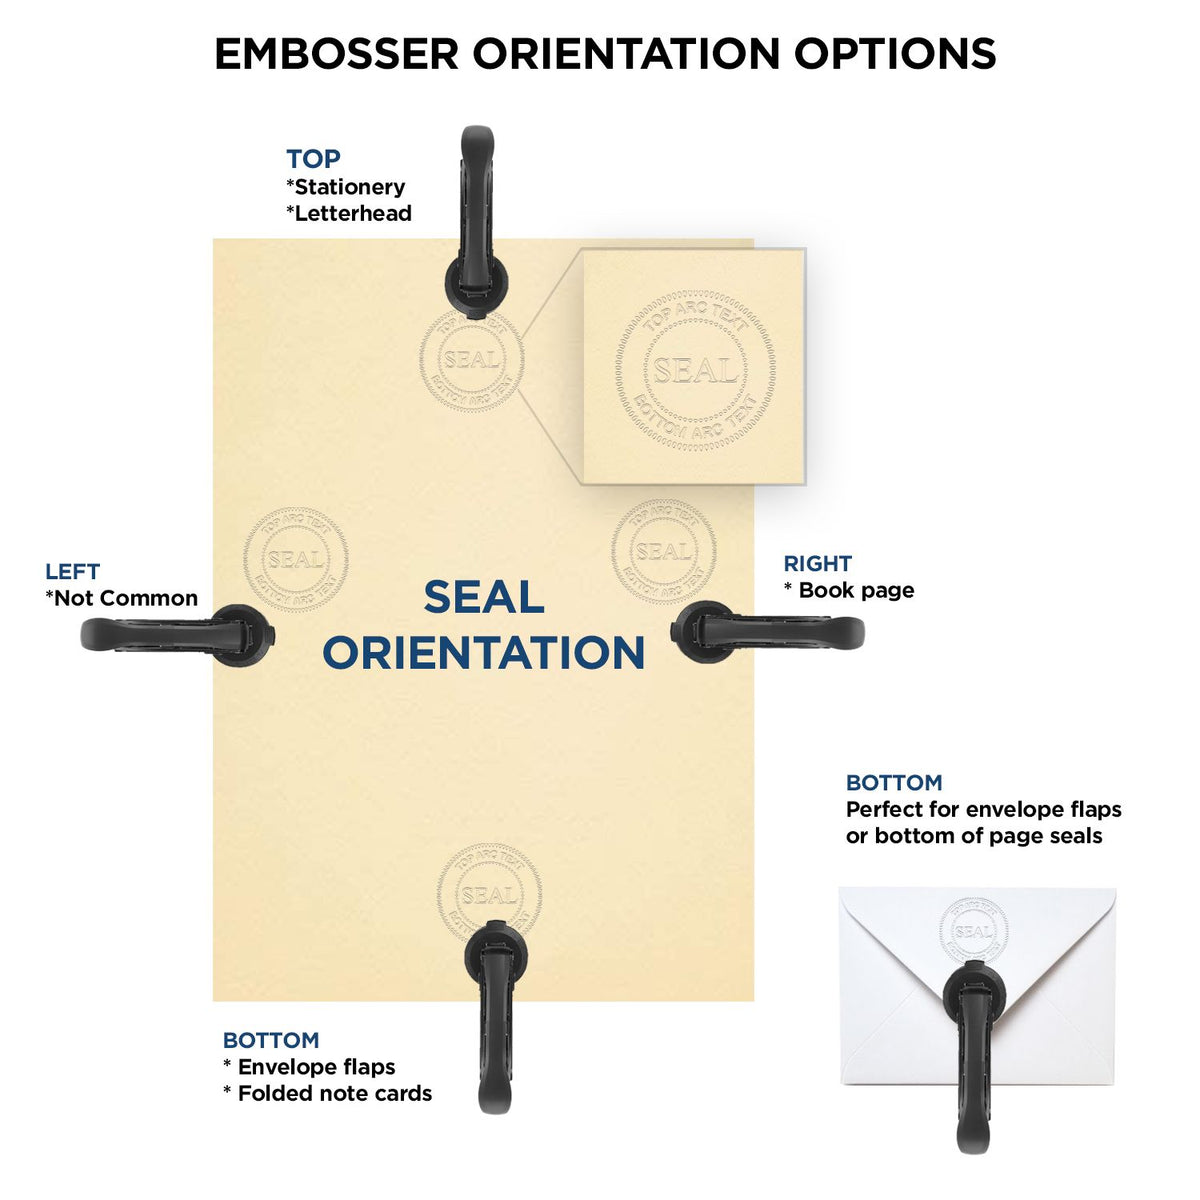 An infographic for the Heavy Duty Cast Iron Nebraska Architect Embosser showing embosser orientation, this is showing examples of a top, bottom, right and left insert.